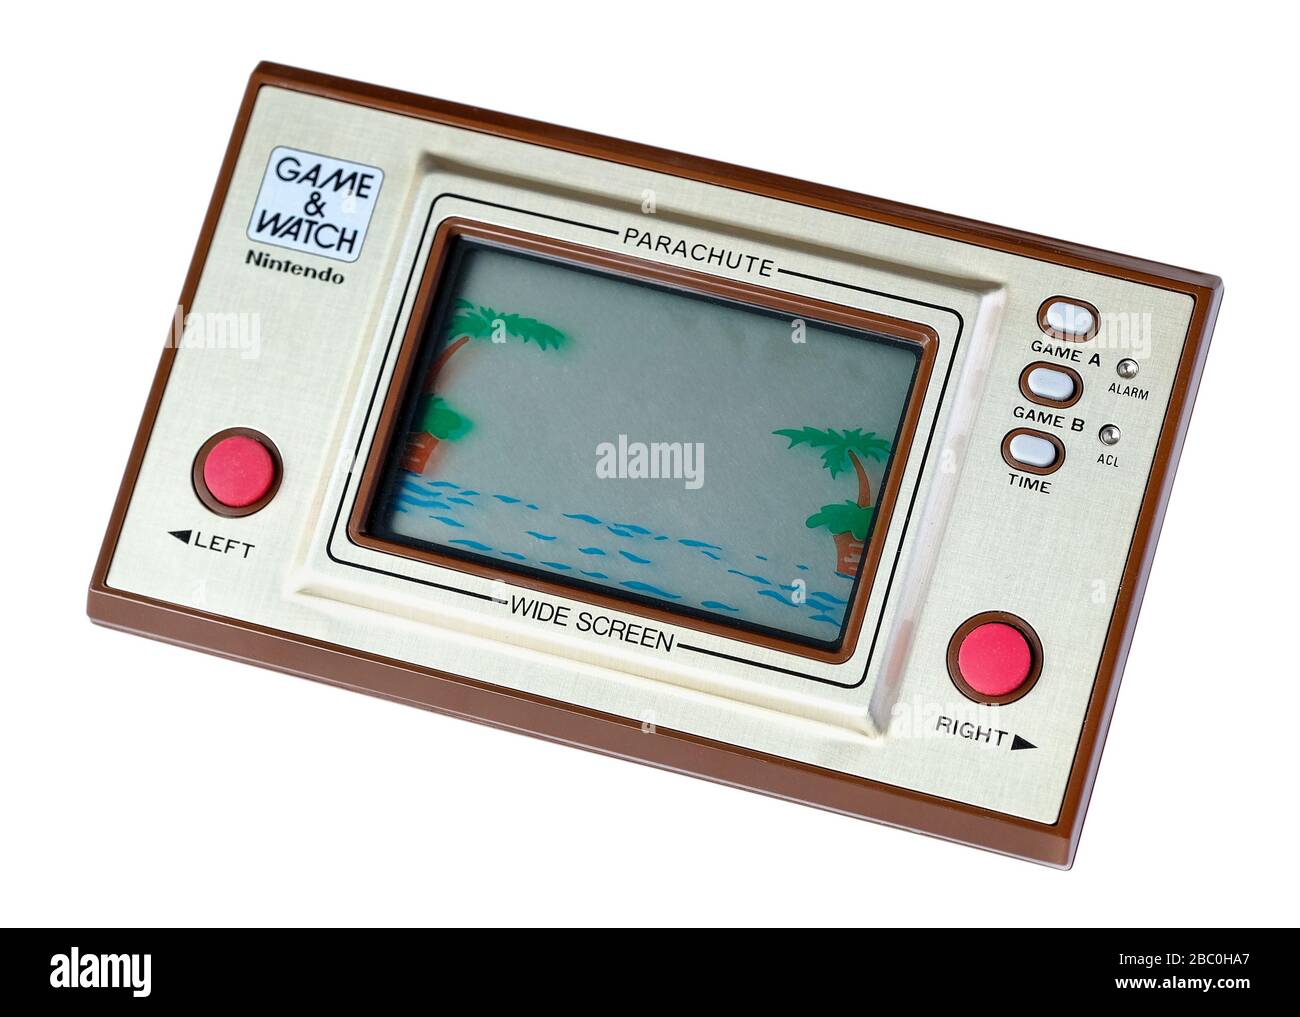 1980s Nintendo 'Game & Watch' Parachute (PR-21) handheld electronic game, created by game designer Gunpei Yokoi and produced from 1980 to 1991. Stock Photo